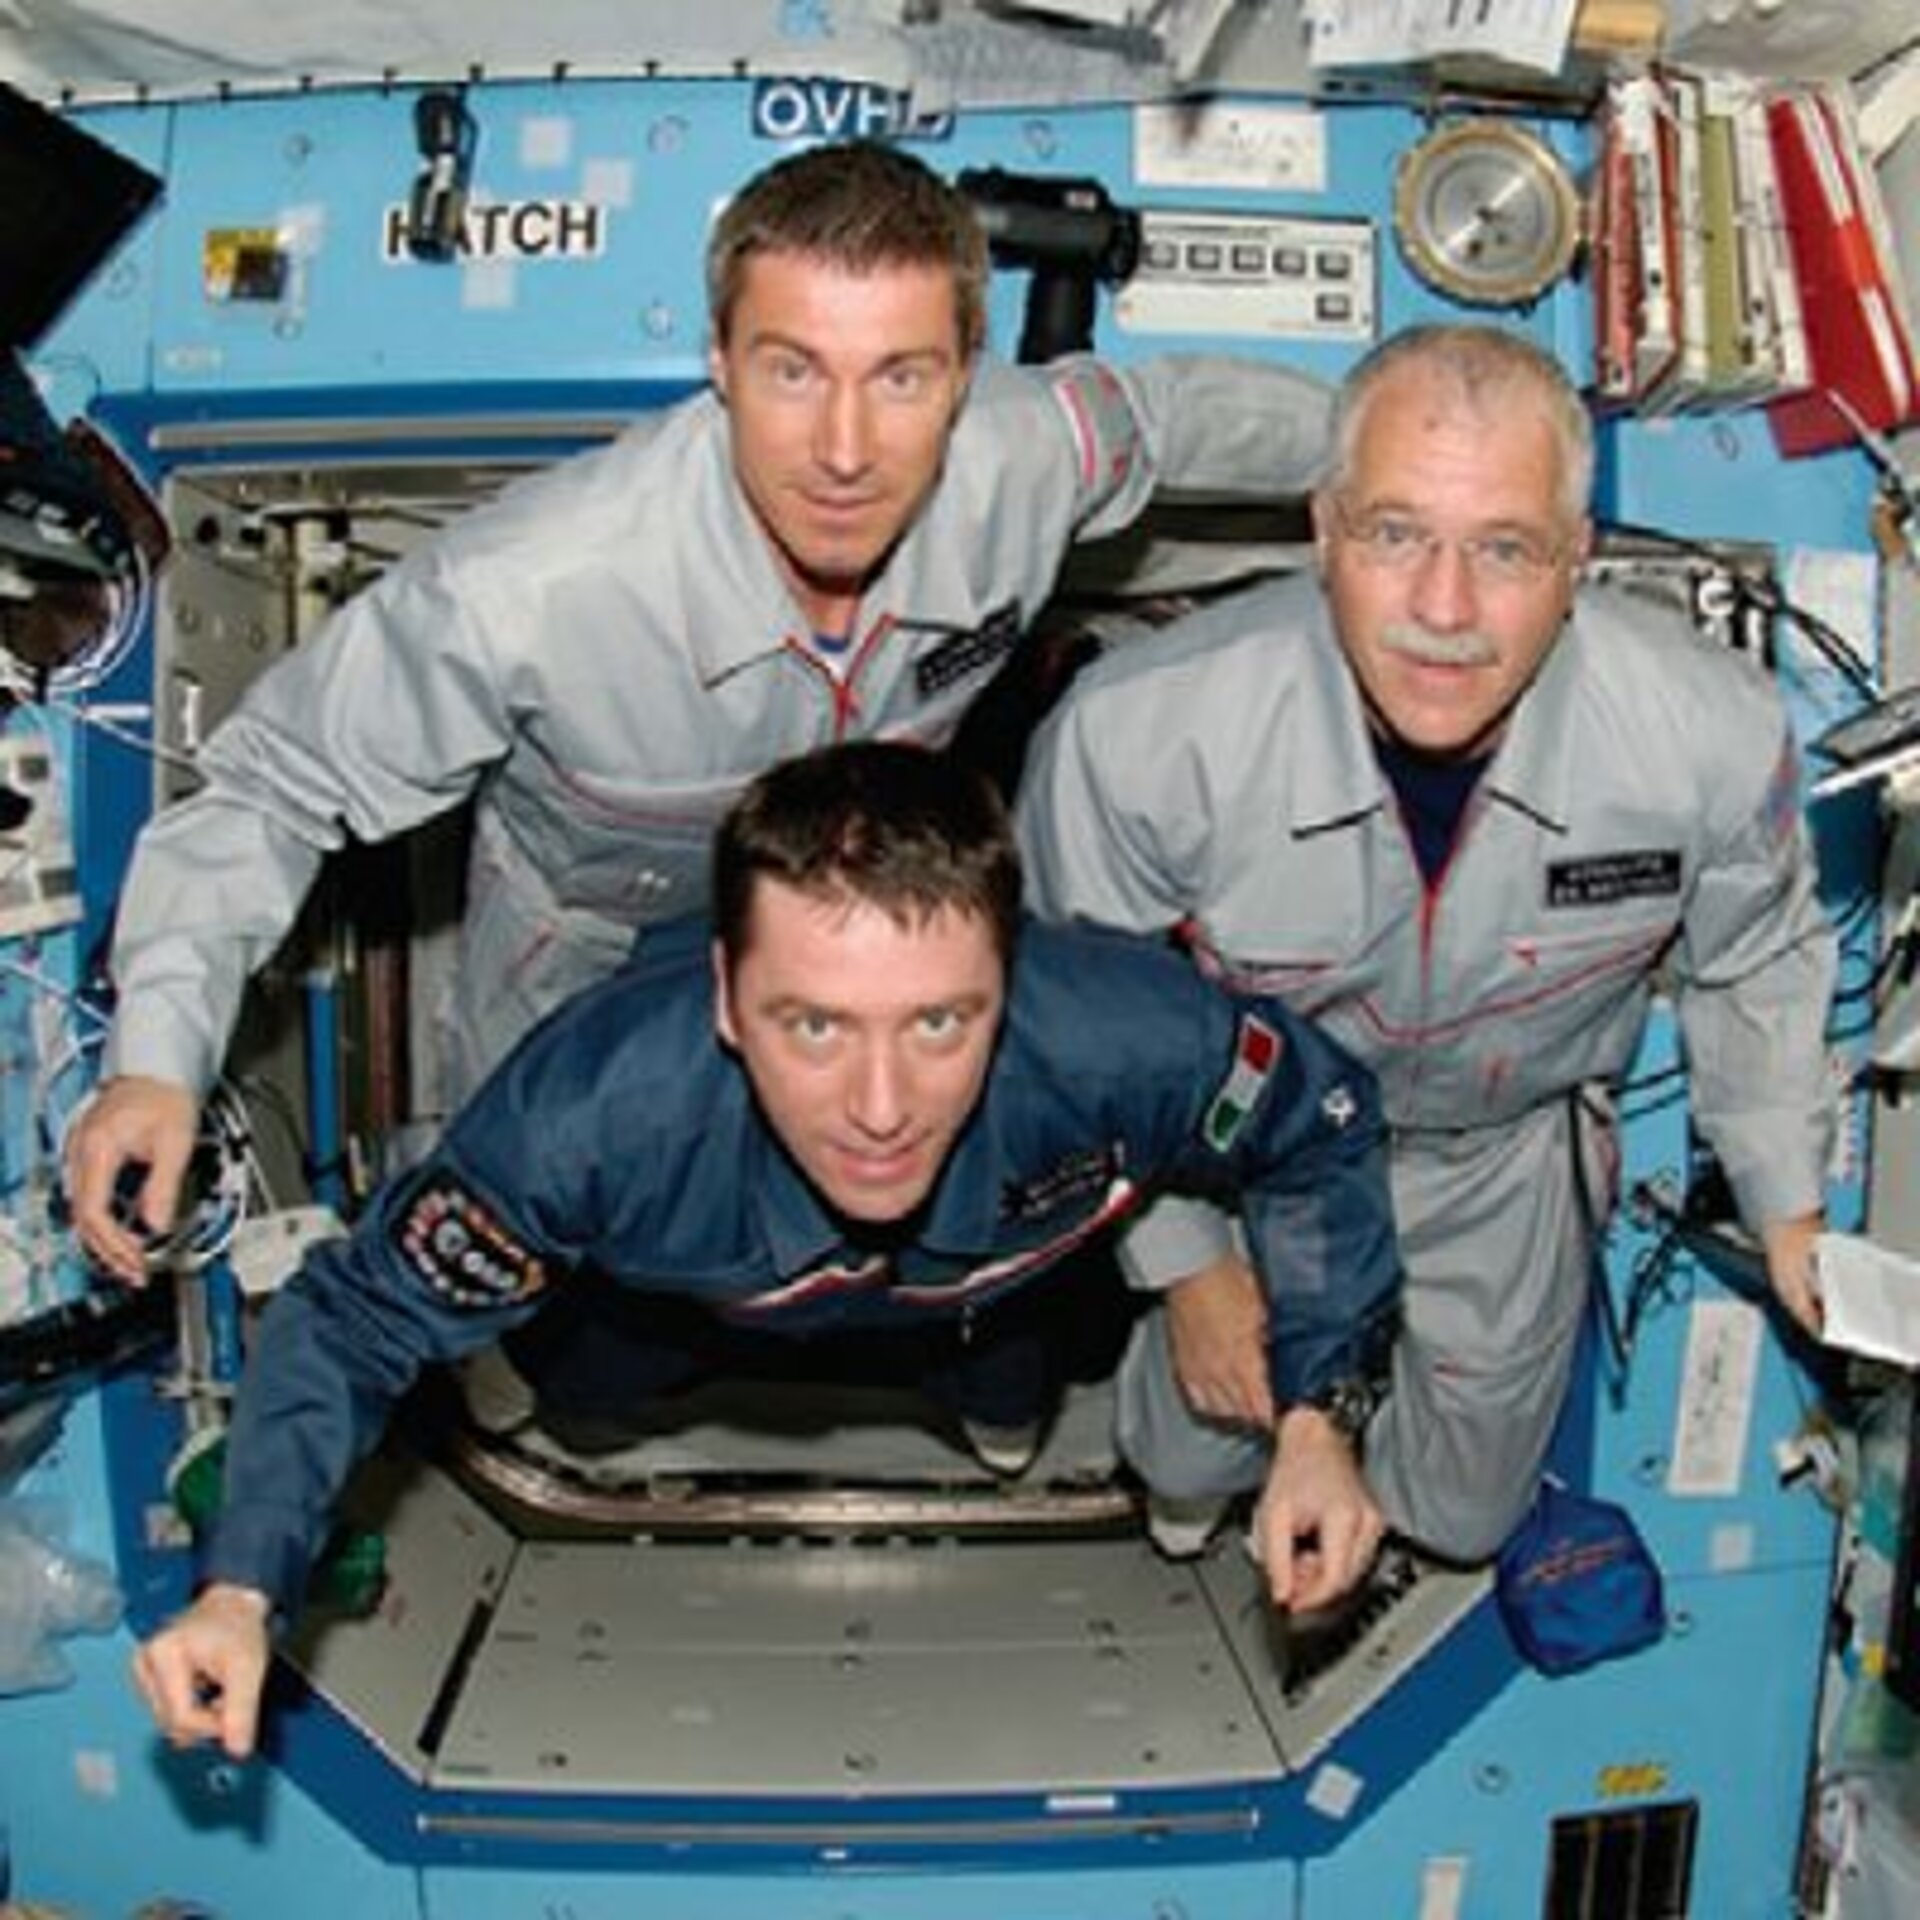 Scenes for the DVD were filmed on ISS by Roberto Vittori and Sergei Krikalev